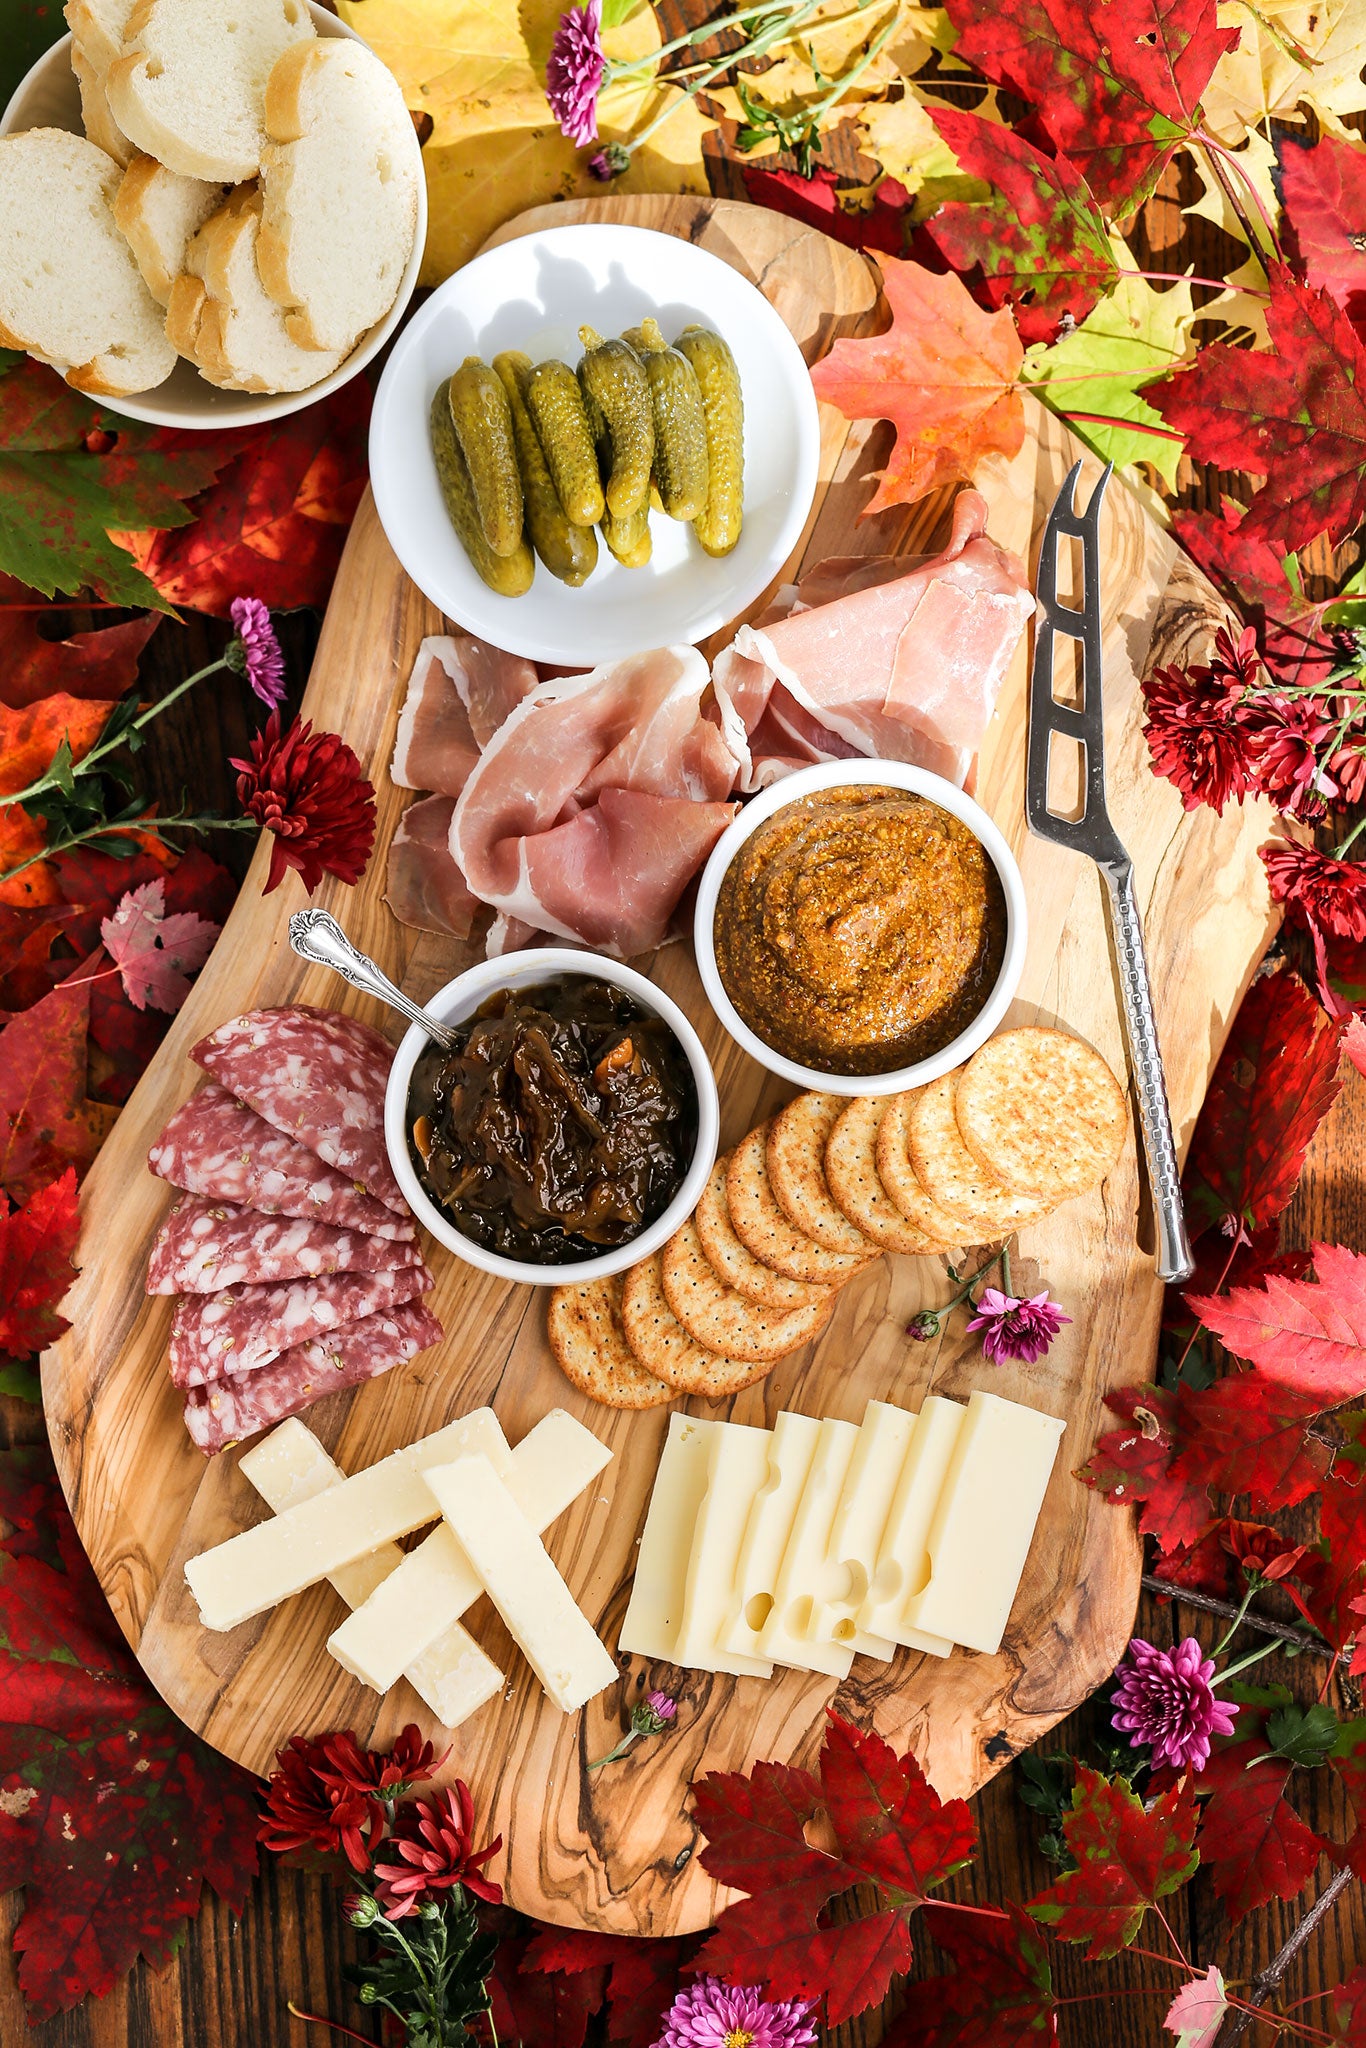 Festive Fall Charcuterie and Cheese Board, Simple Meat and Cheese Platter